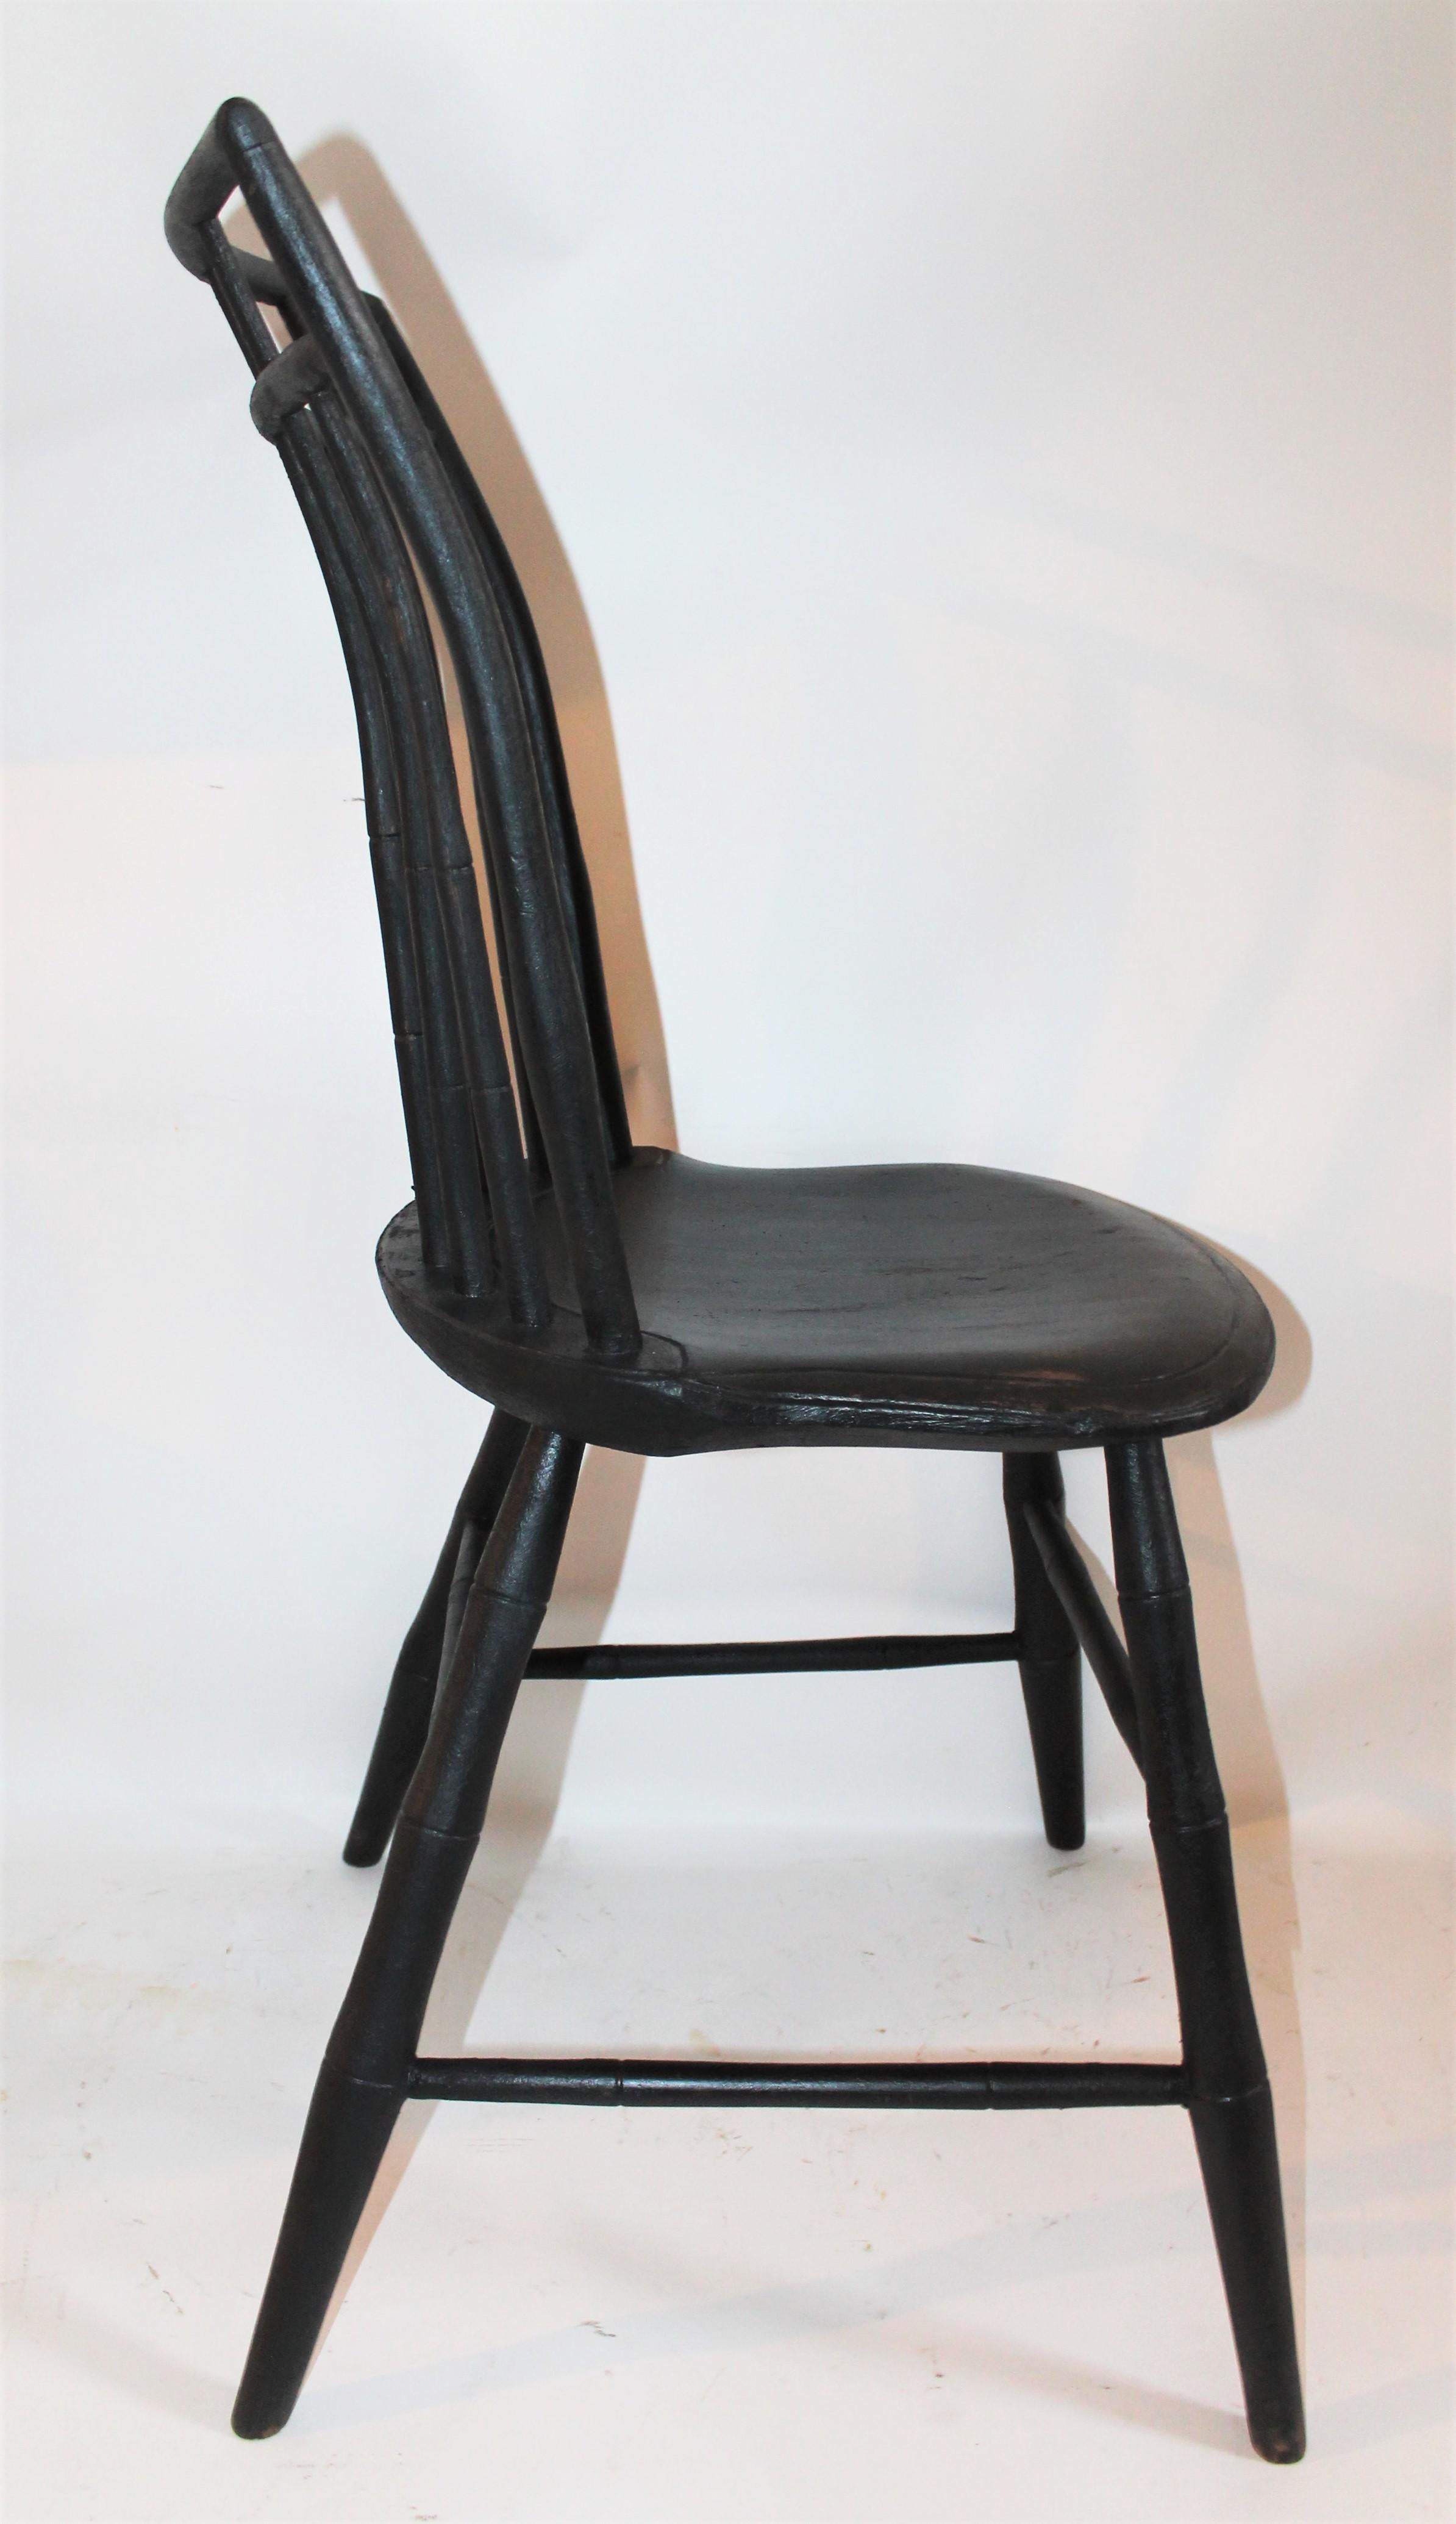 Country 19th Century Windsor Chairs in Black Painted Surface, Pair